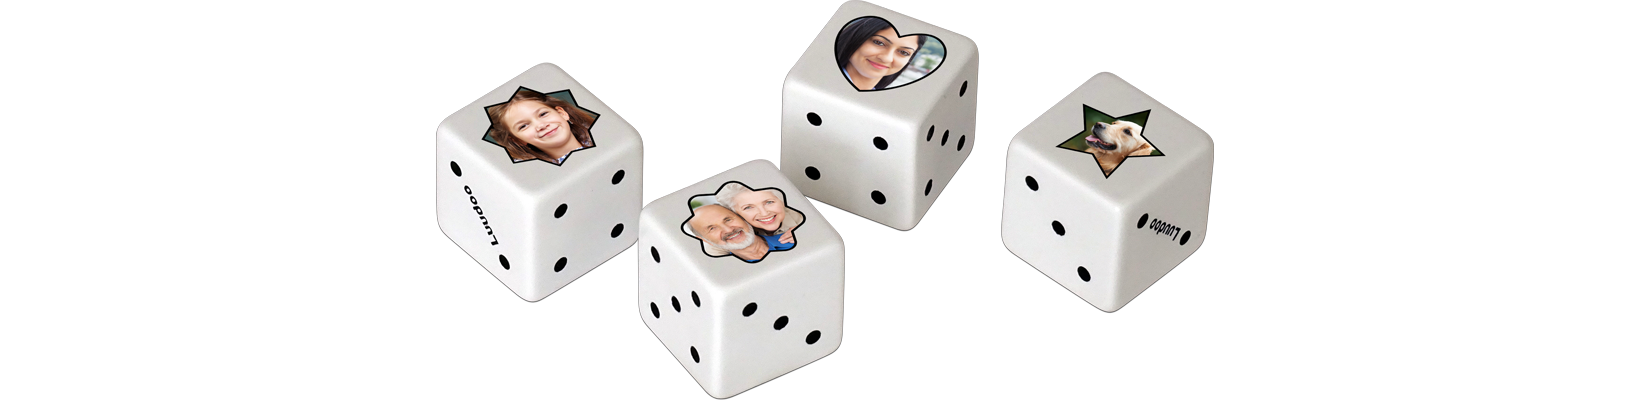 Personalise a gaming dice by printing a picture on one of the dice faces!